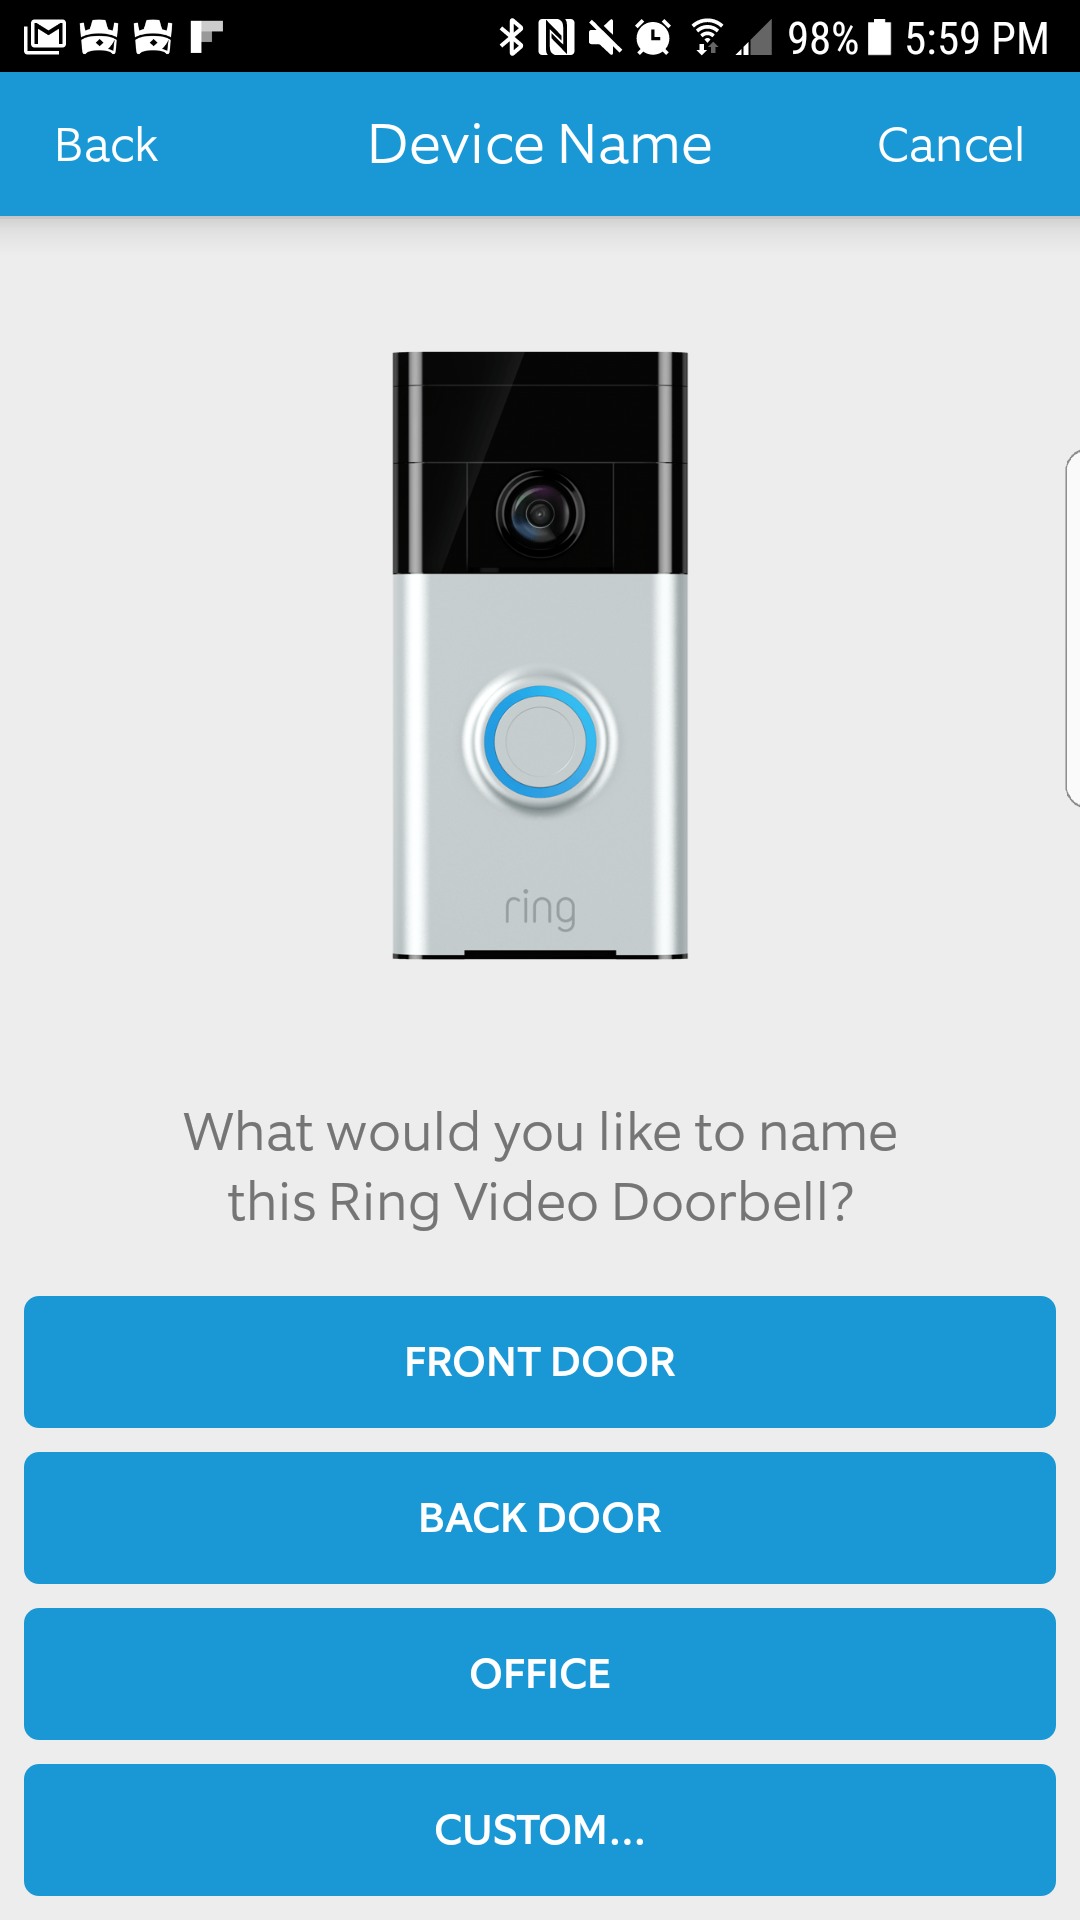 Once a product is selected the Ring app suggests possible names for your device.